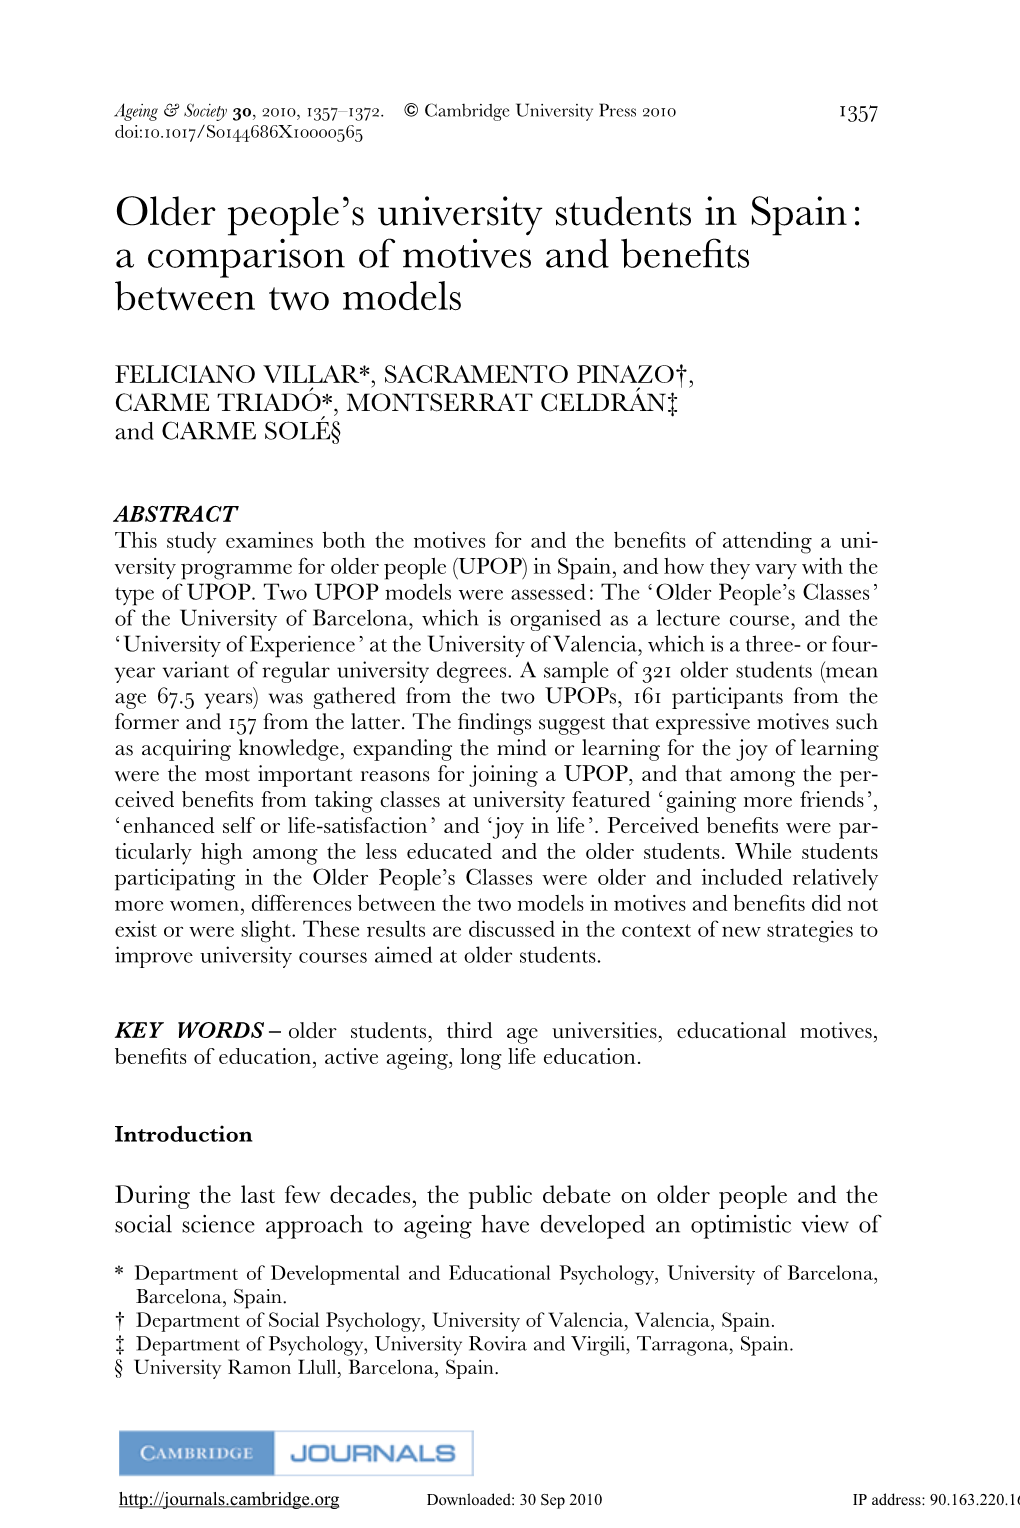 Older People's University Students in Spain: a Comparison of Motives And